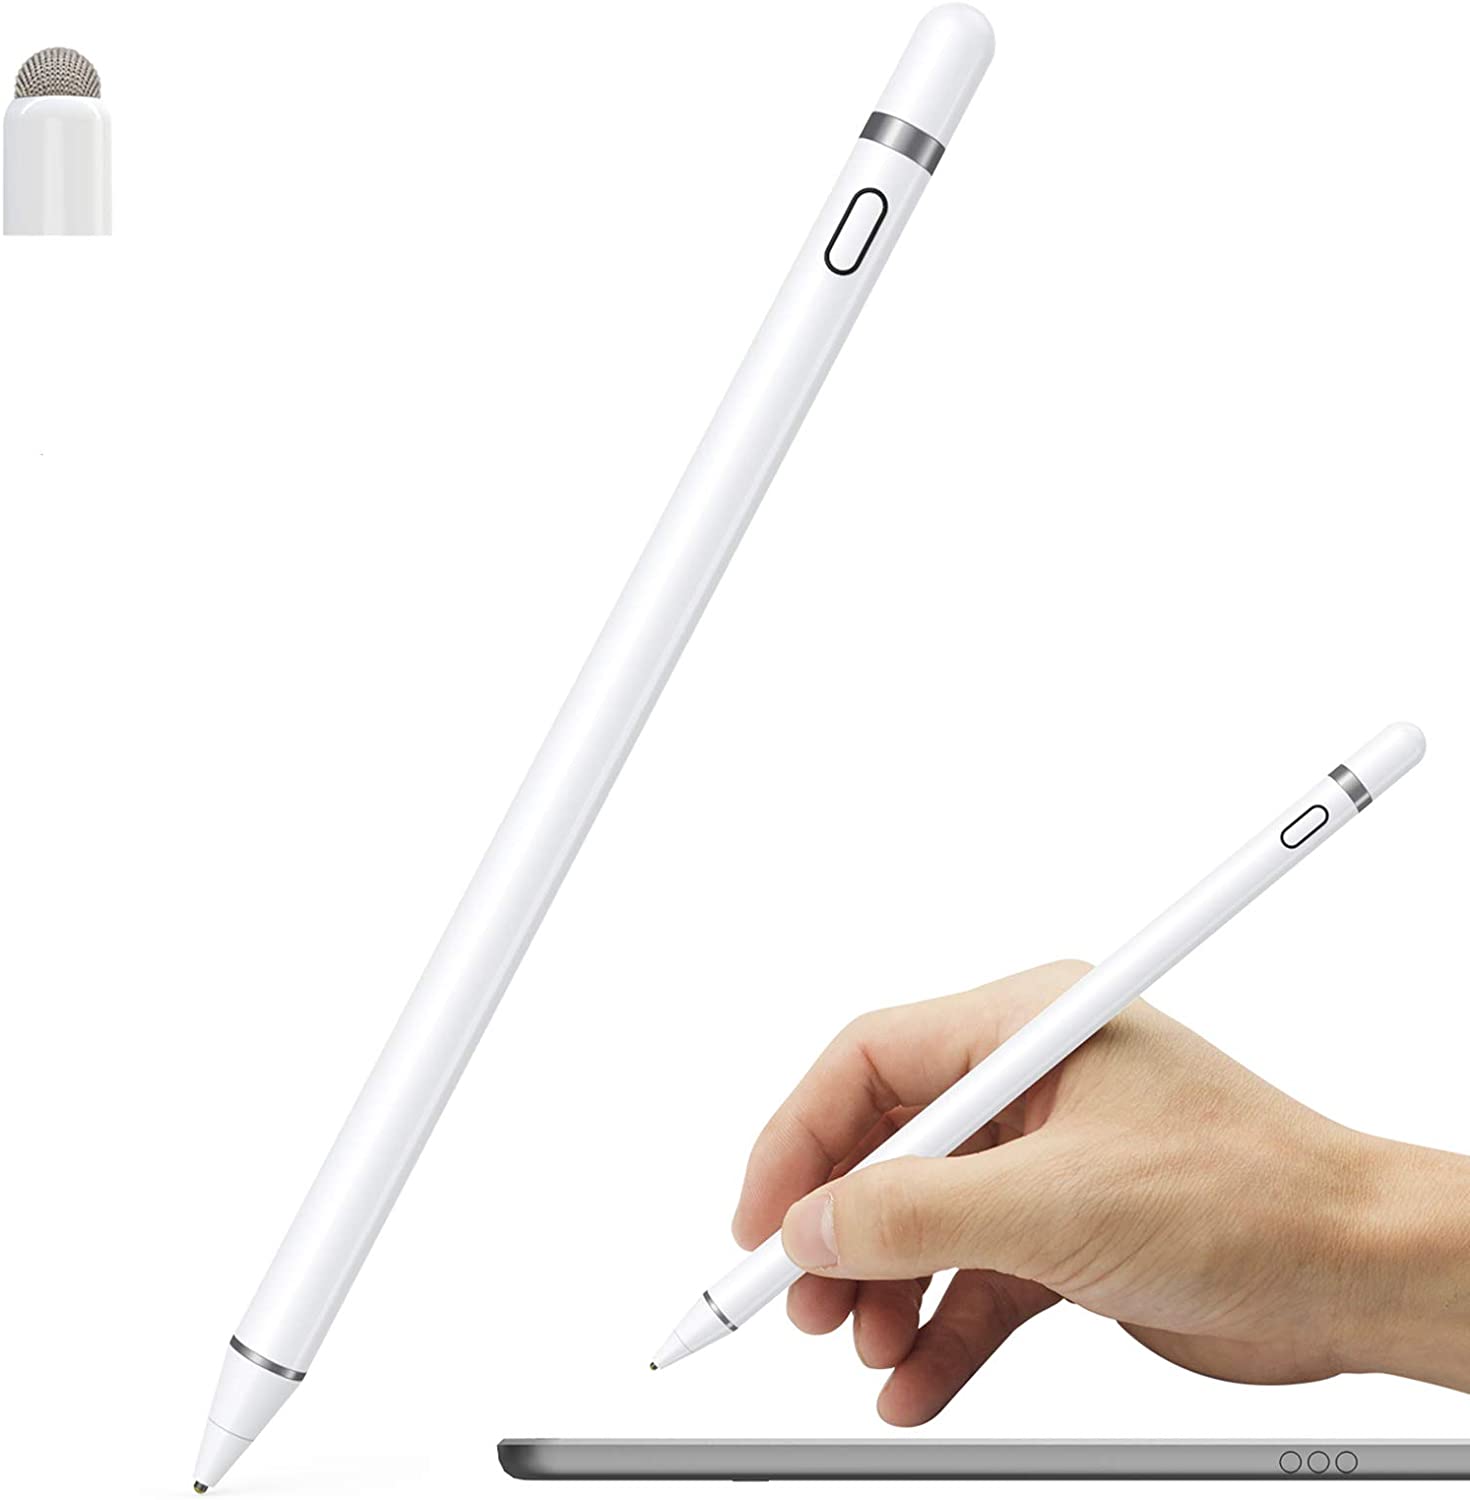 Good Wholesale Vendors Capacitive Stylus Pen To Work With Iphone - Active Stylus Pen Compatible for iOS&Android Touch Screens, Pencil for iPad with Dual Touch Function,Rechargeable Stylus for ...